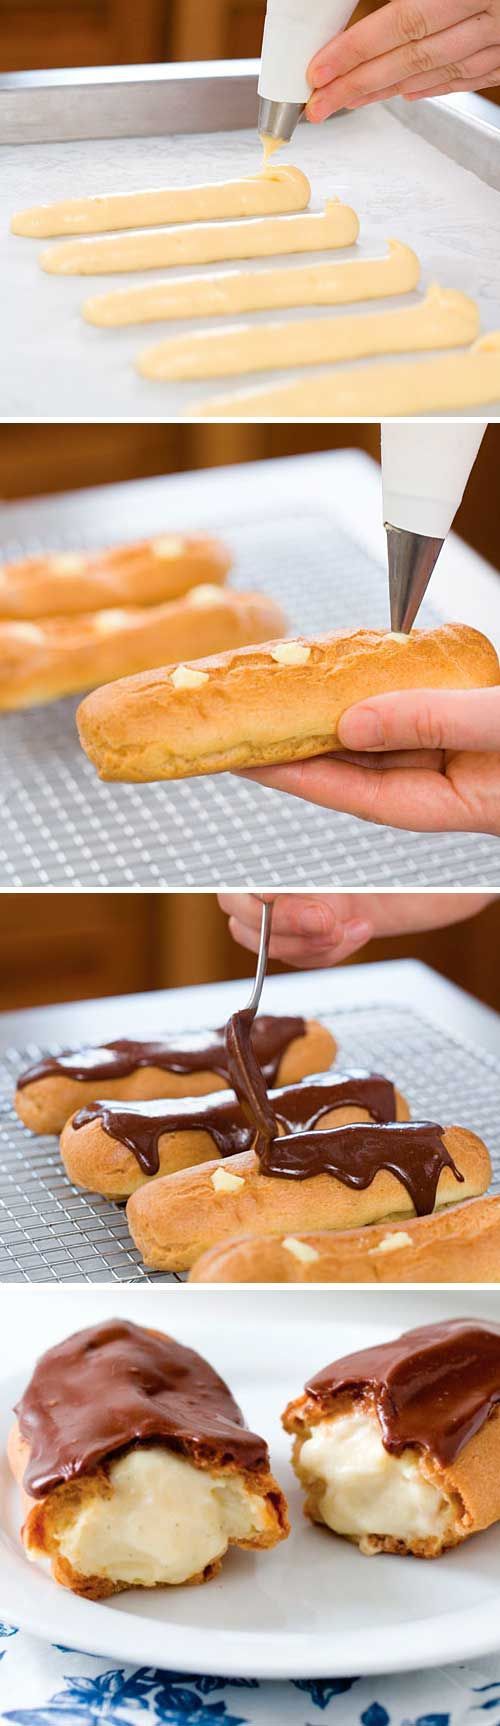 @Brittany Hall- make Bryan a Pinterest fan!     Secrets to Making Éclairs: The refined, elegant, French cousin of the Twinkie.